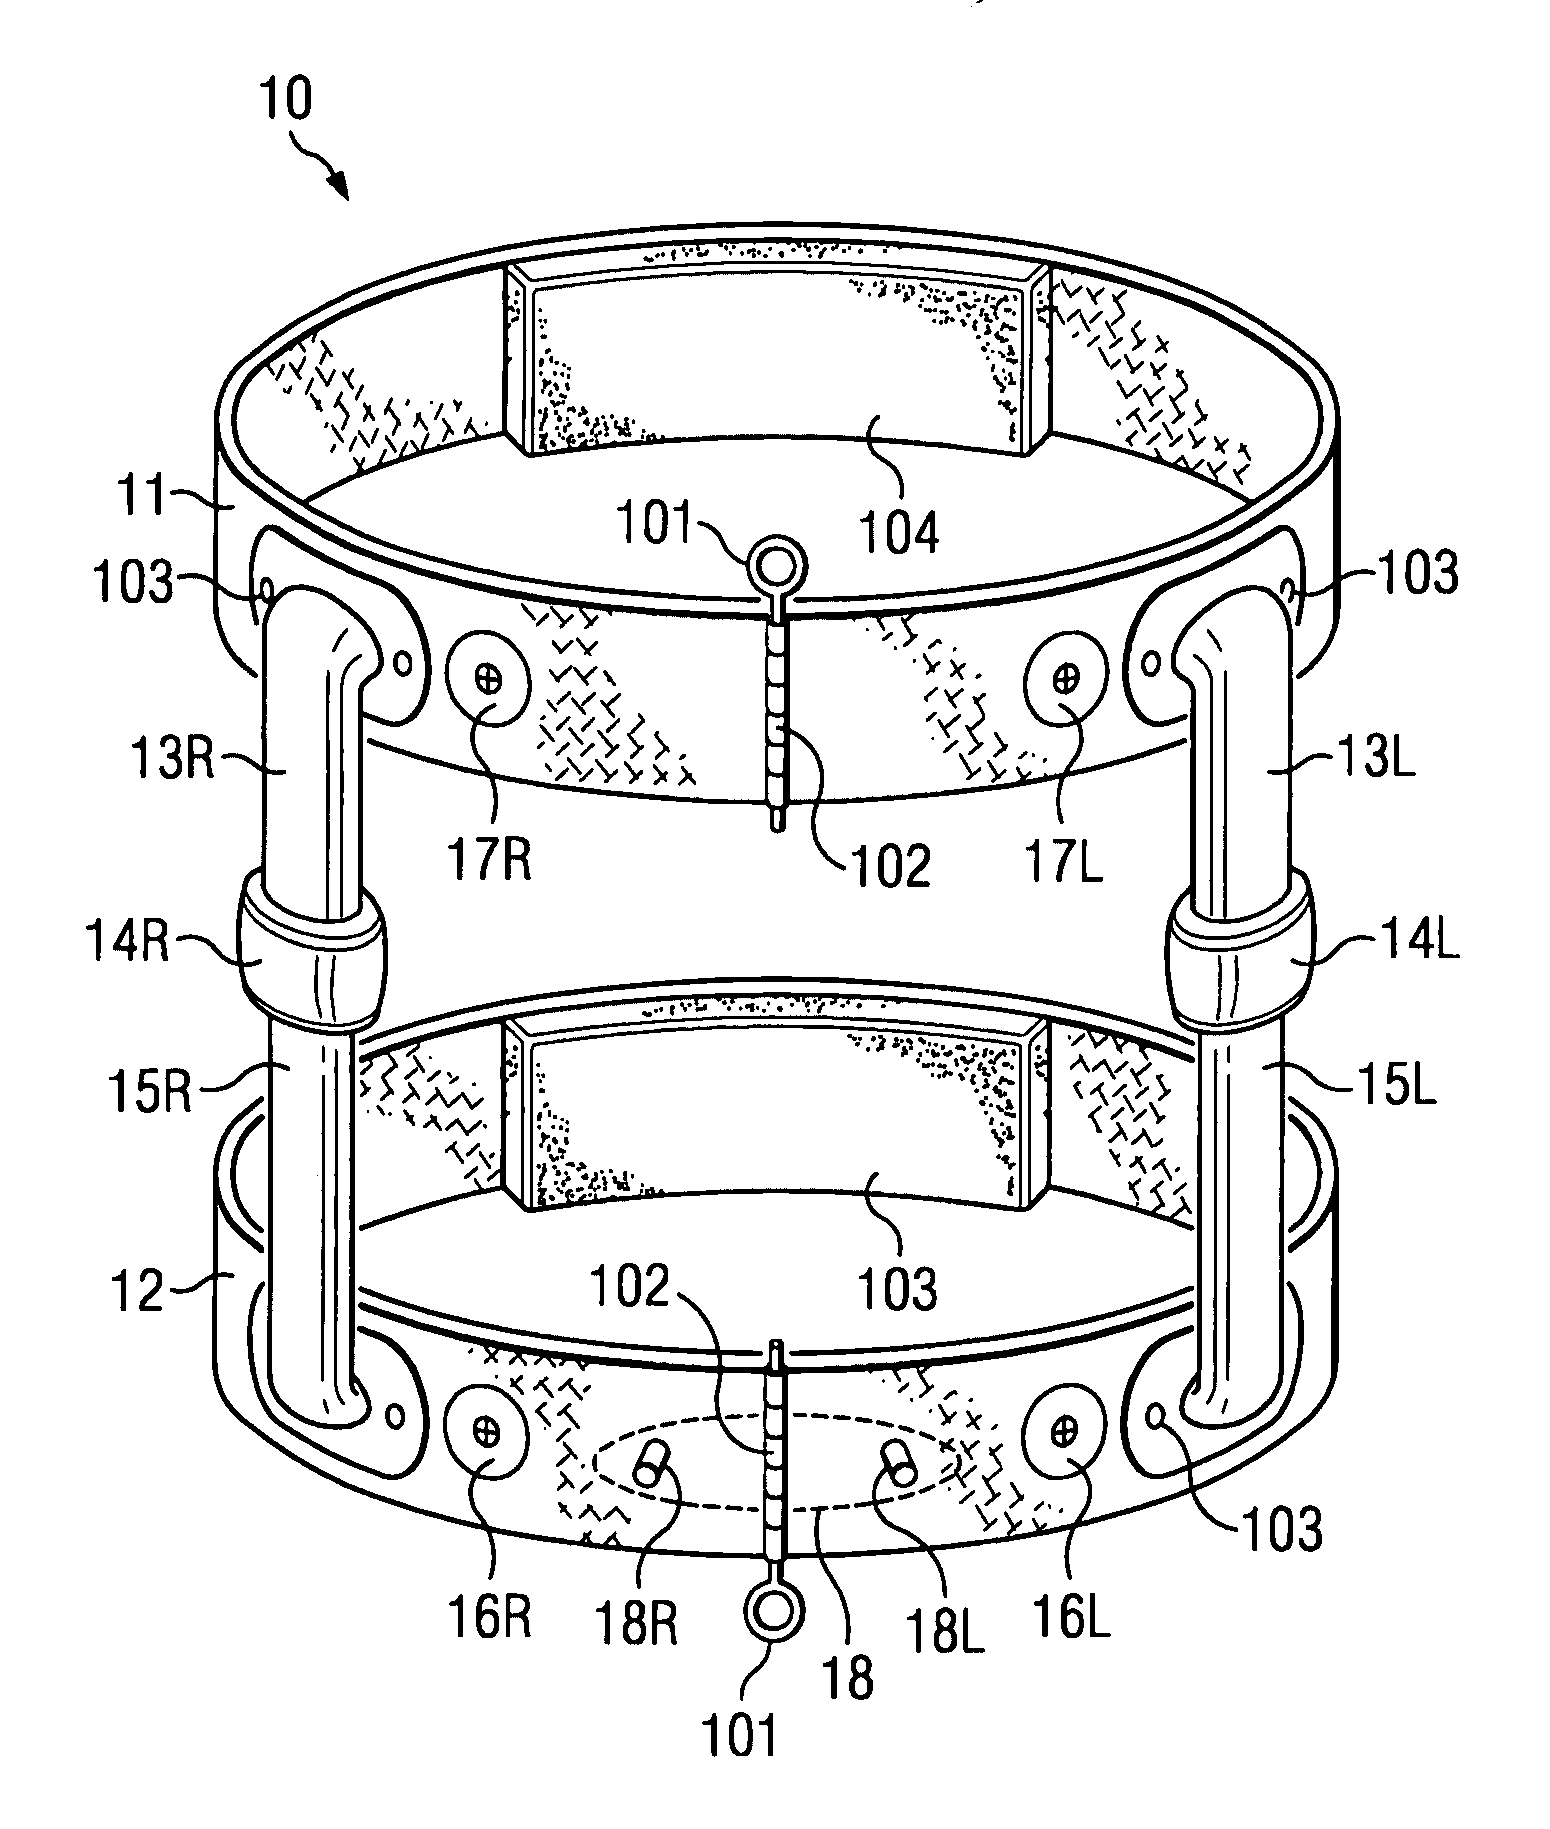 System and method for externally controlled surgical navigation